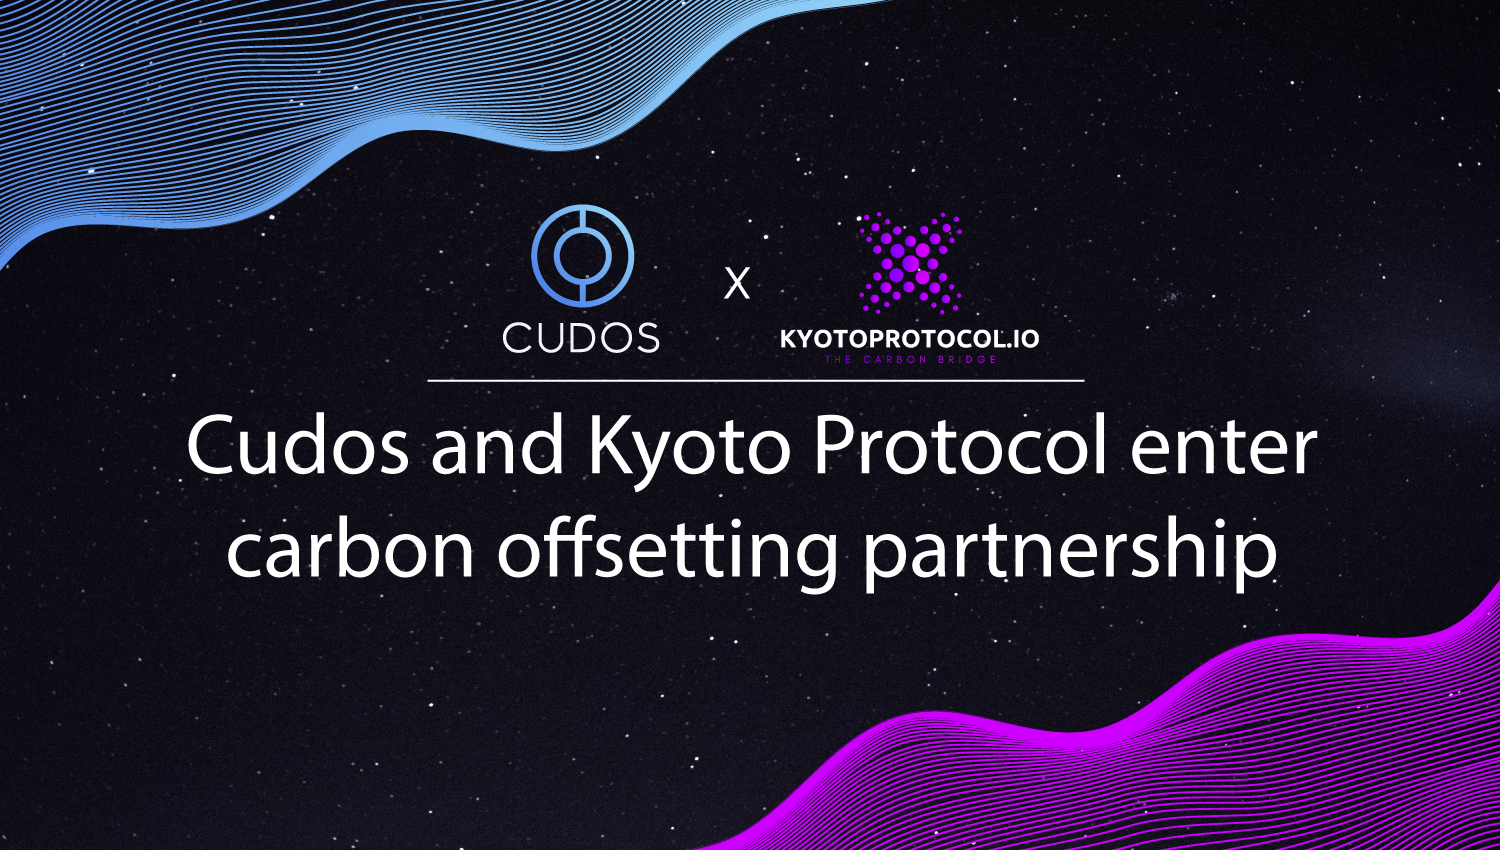 Cudos and KyotoProtocol.io enter carbon offsetting partnership